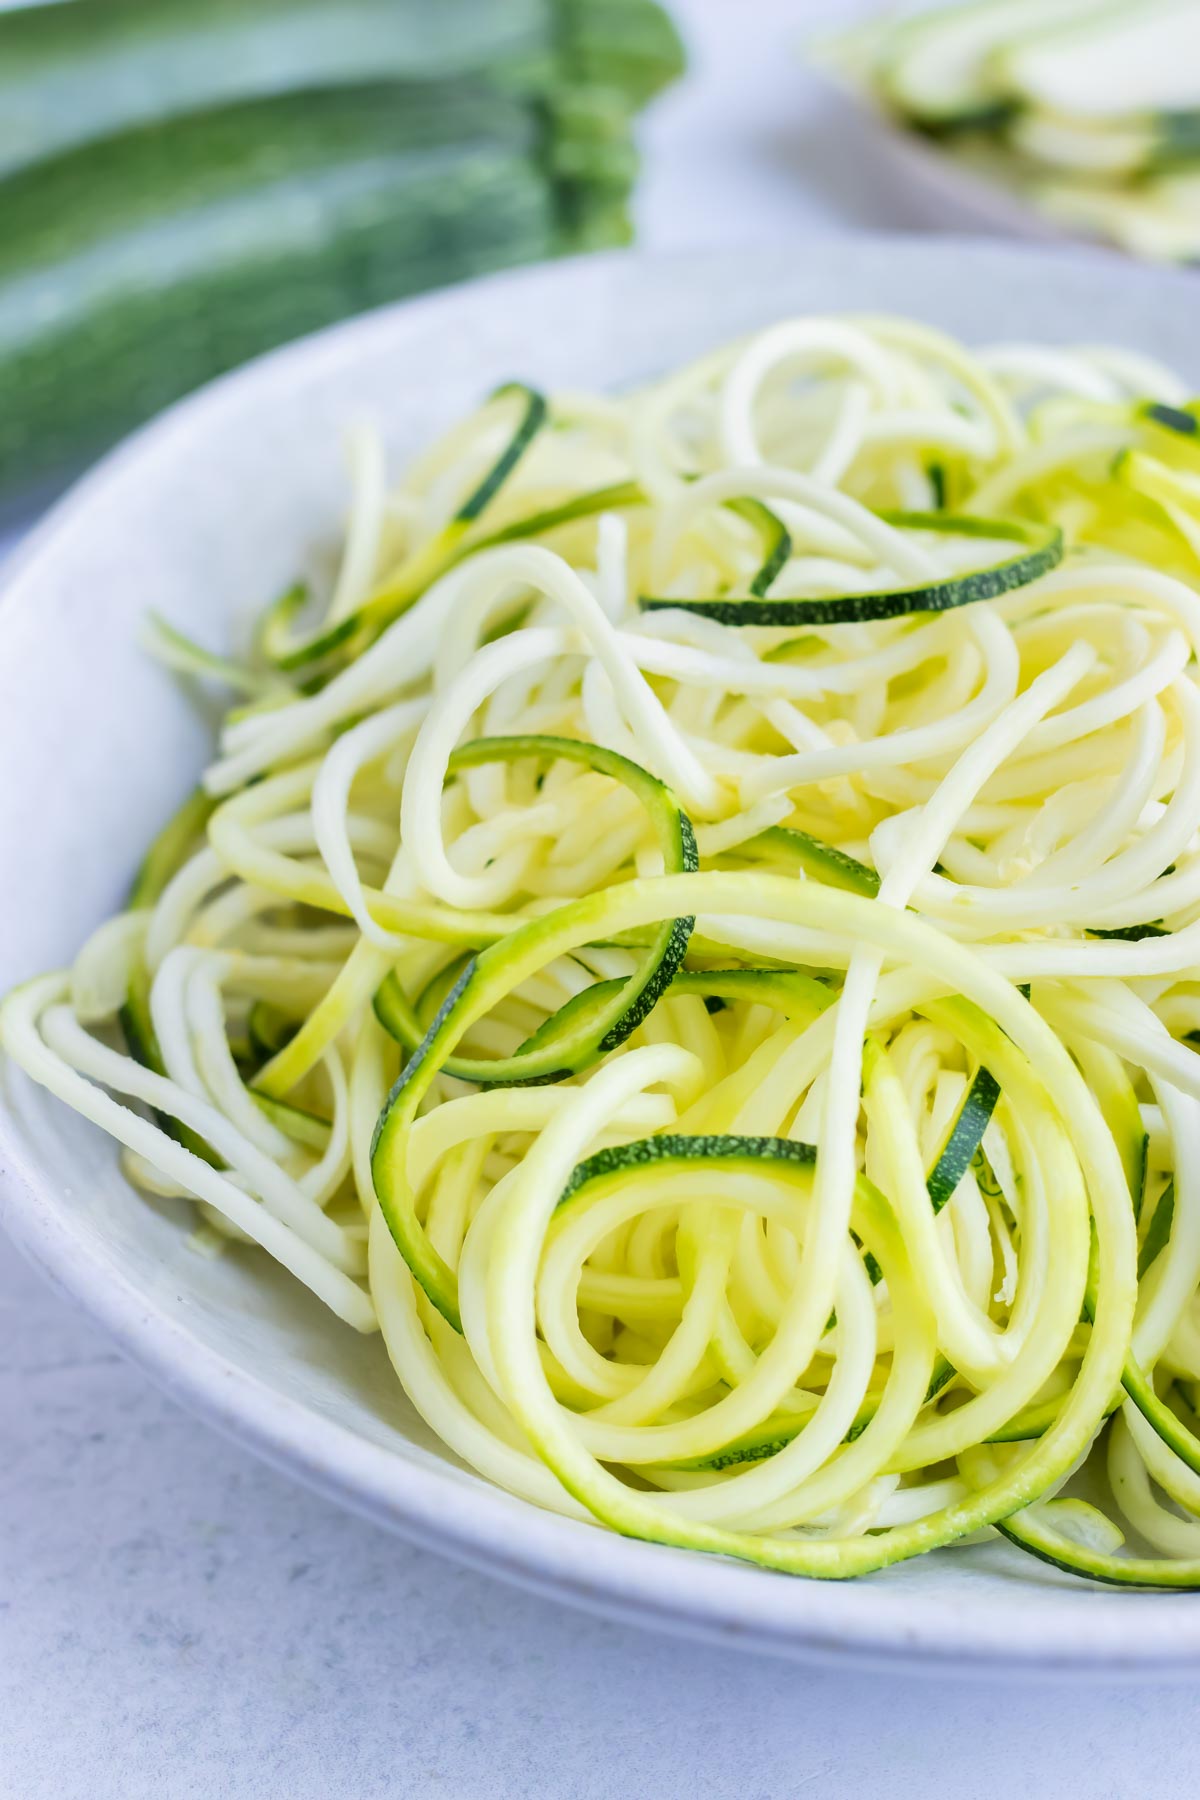 How To Make Zucchini Noodles (Zoodles) - Evolving Table